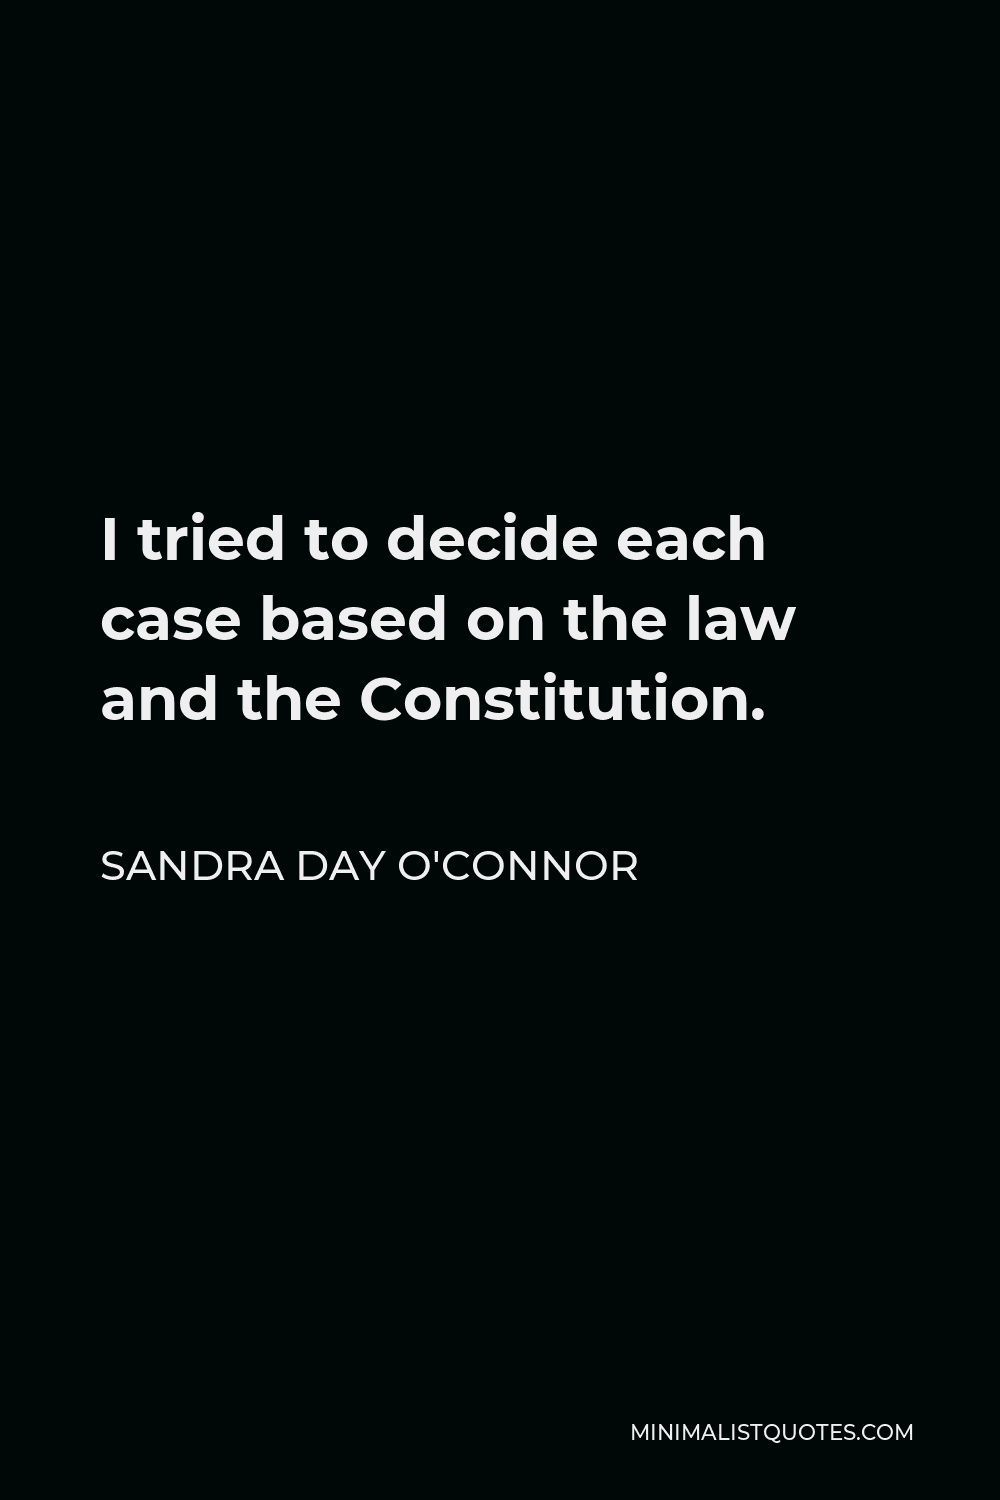 Sandra Day O'Connor Quote - I tried to decide each case based on the law and the Constitution.